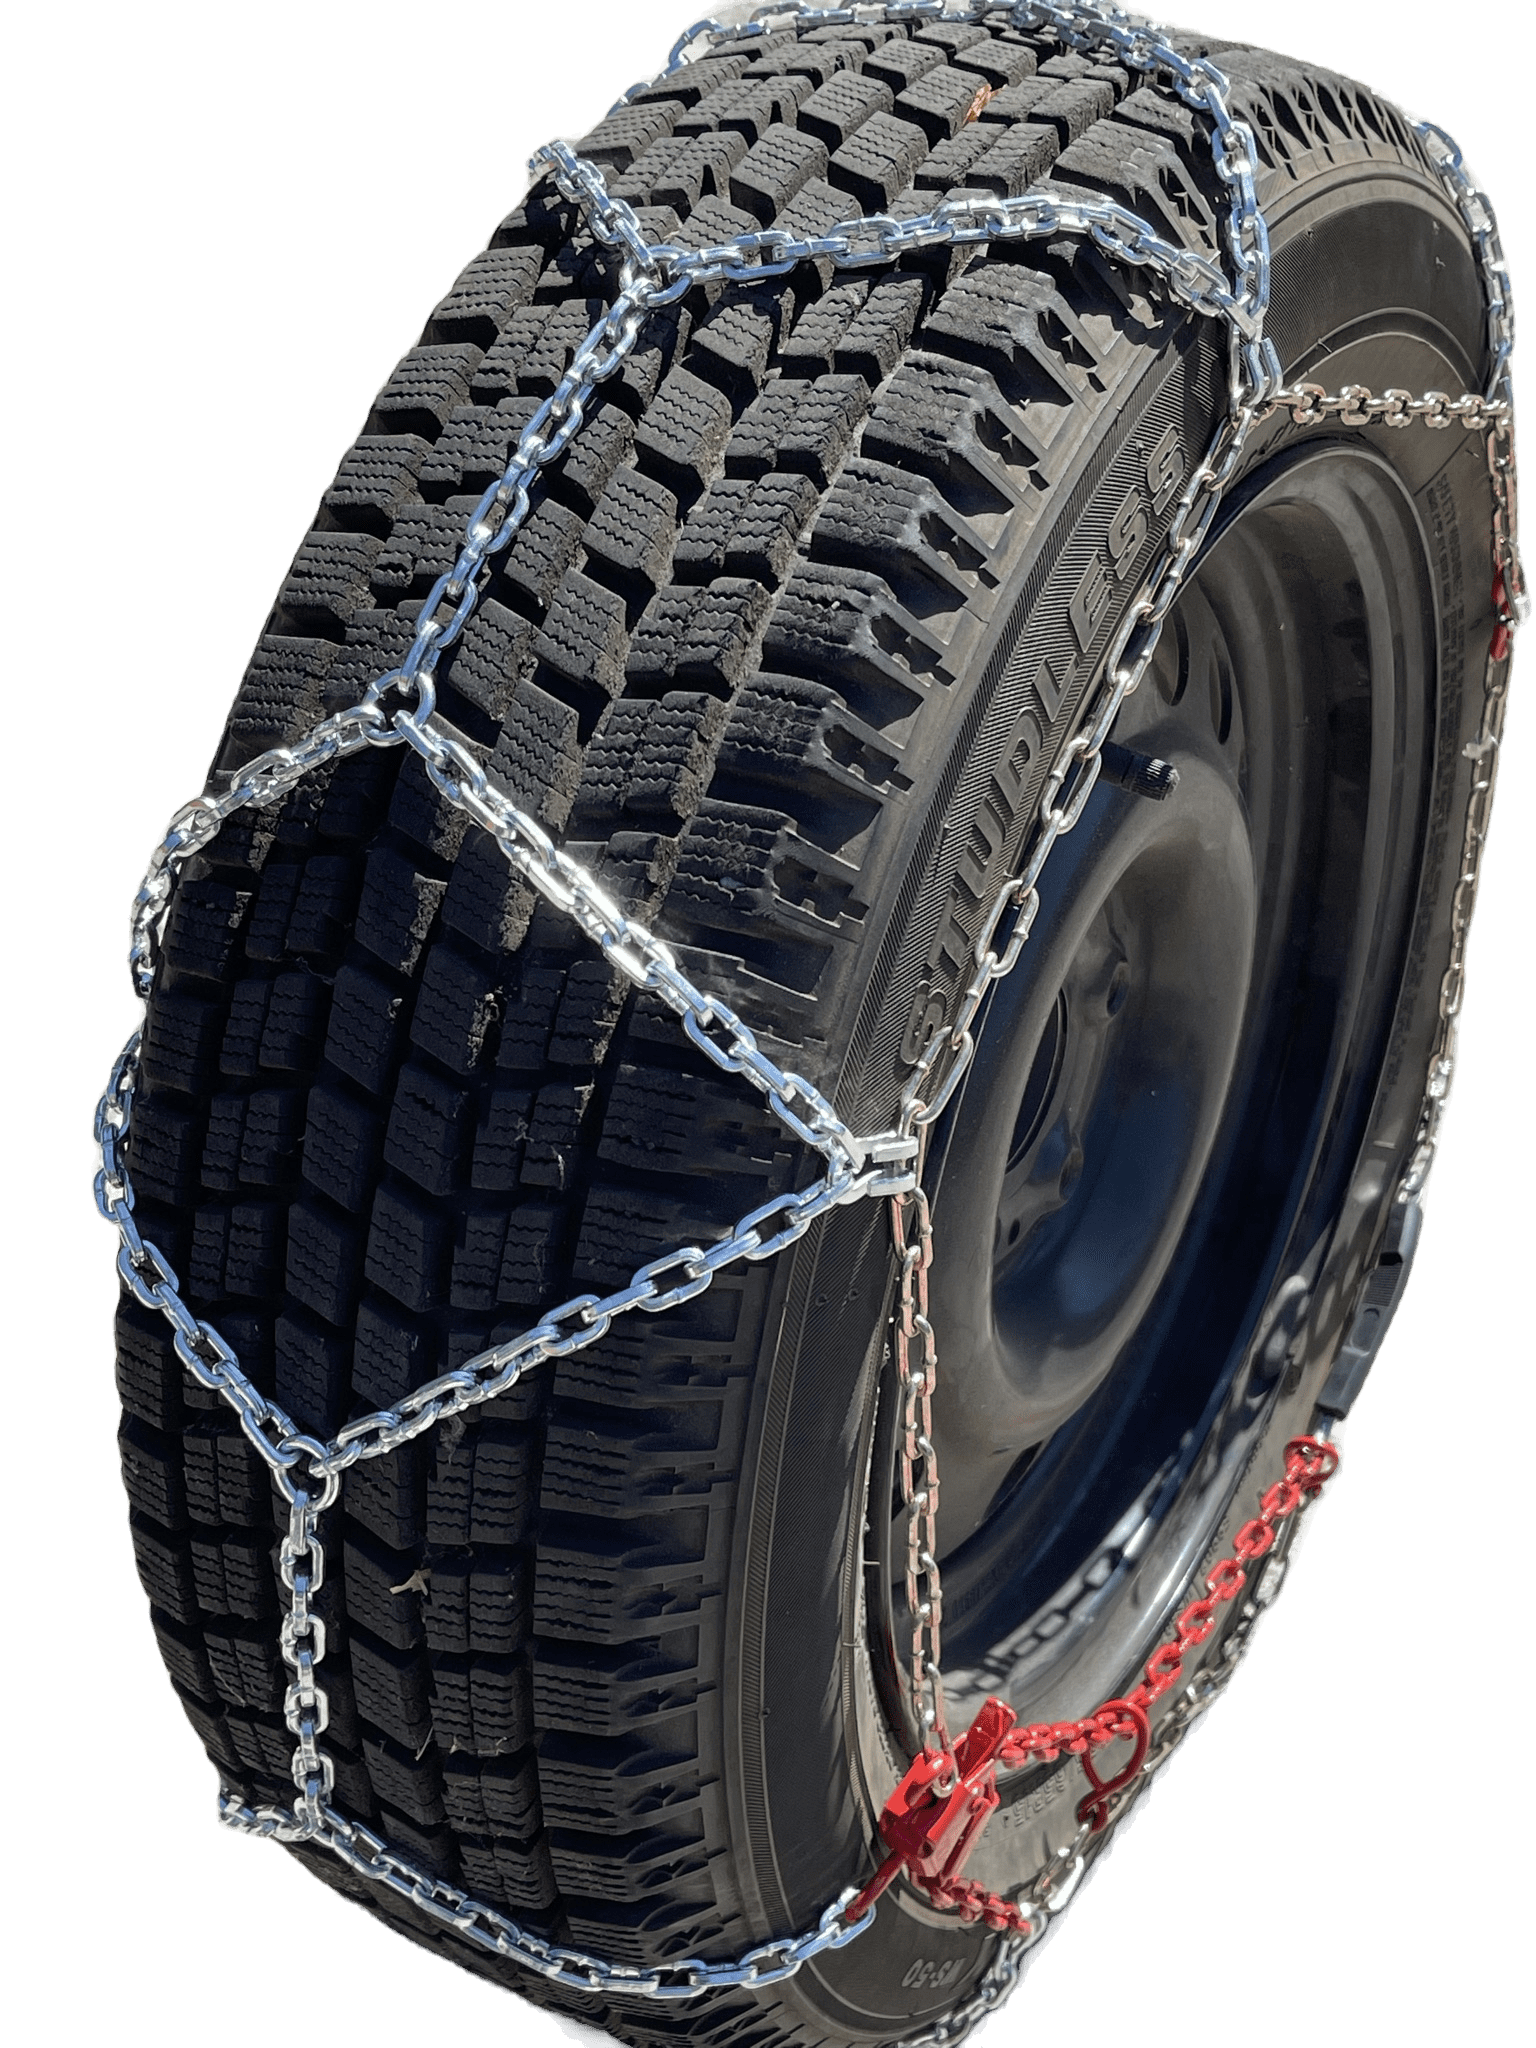 Pair of 2 Link Tire Chains 18x8.5x10 for Simplicity & Kubota Lawn Mower The ROP Shop Tractor 